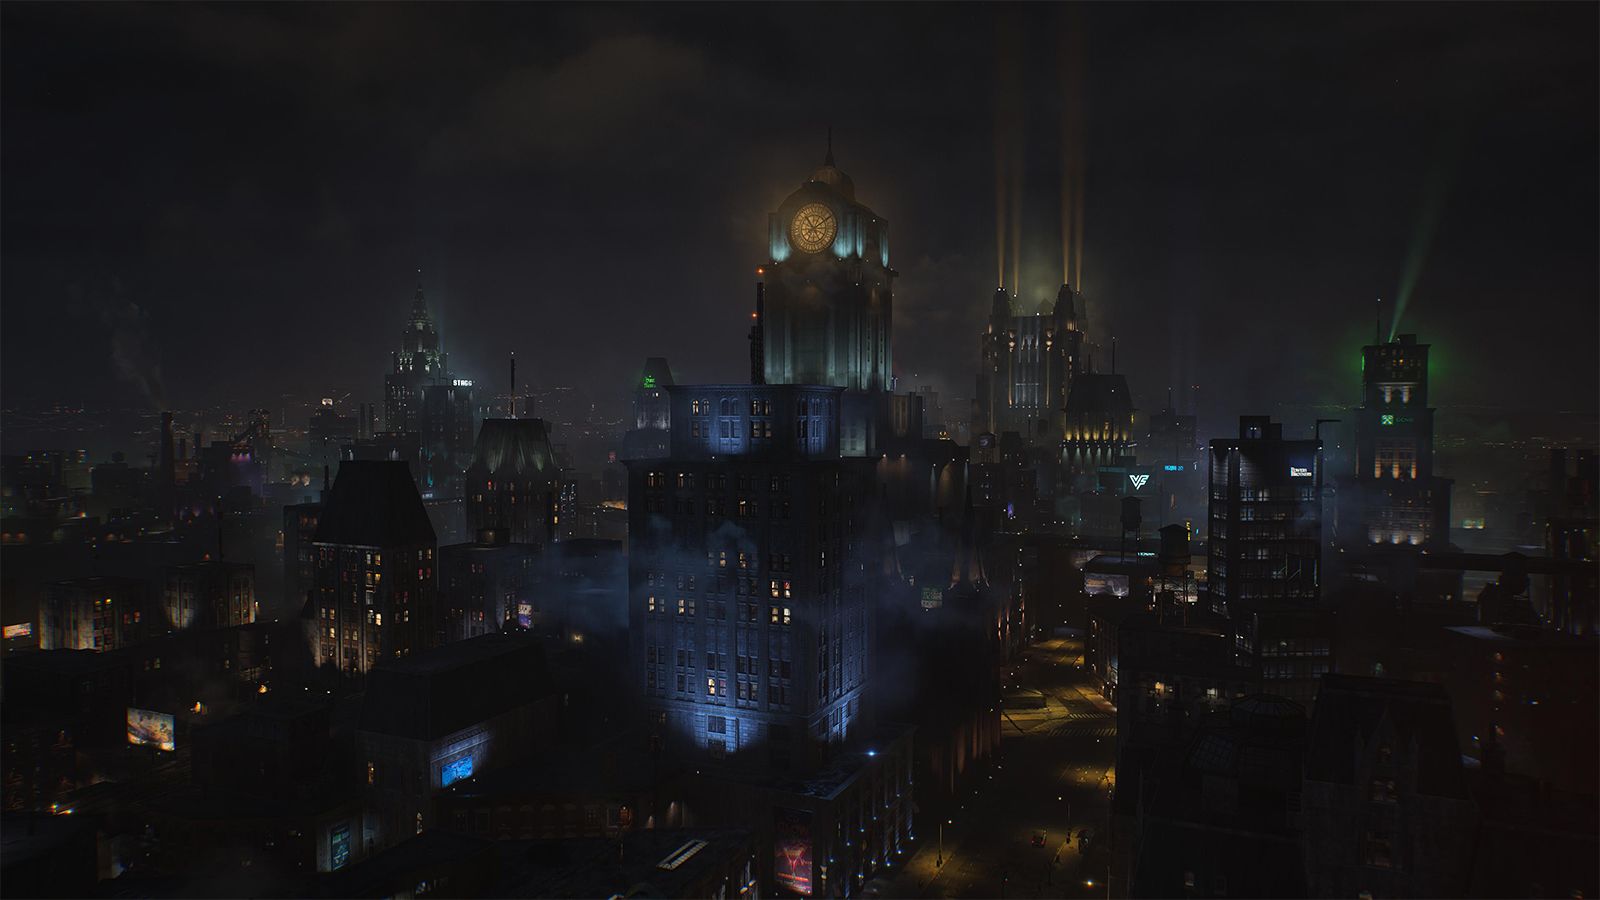 Gotham Knights (PS5) review